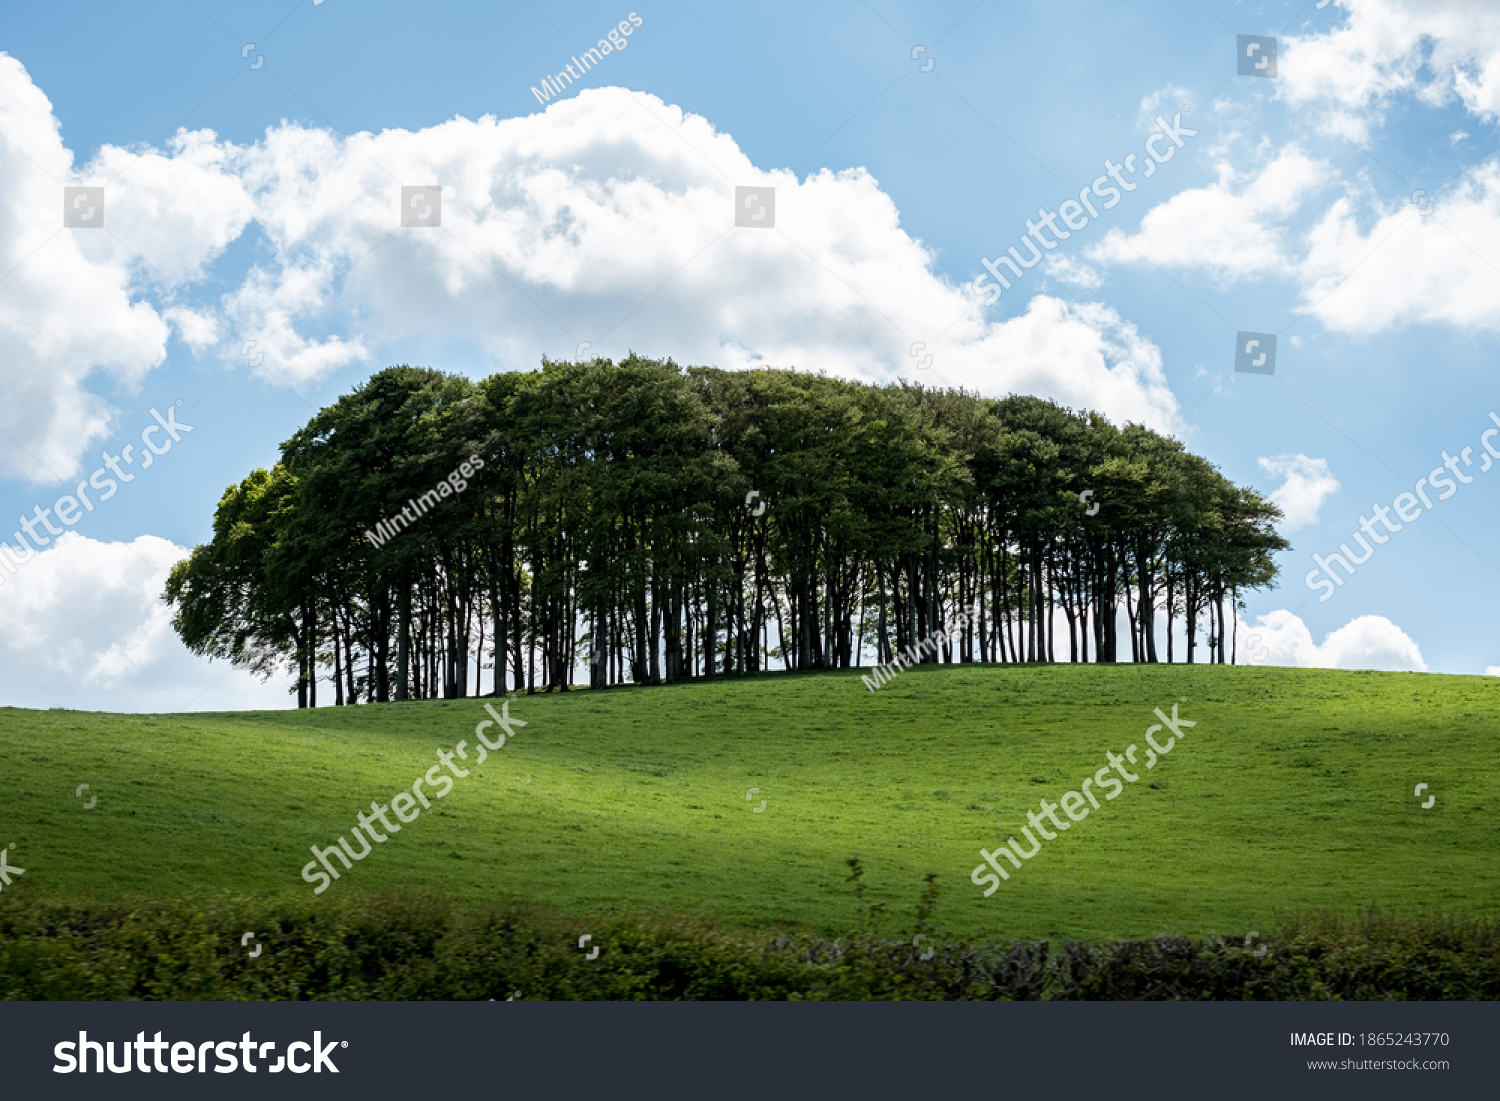 Landscape with Beech Tree copse on a hilly field under a cloudy sky. #1865243770